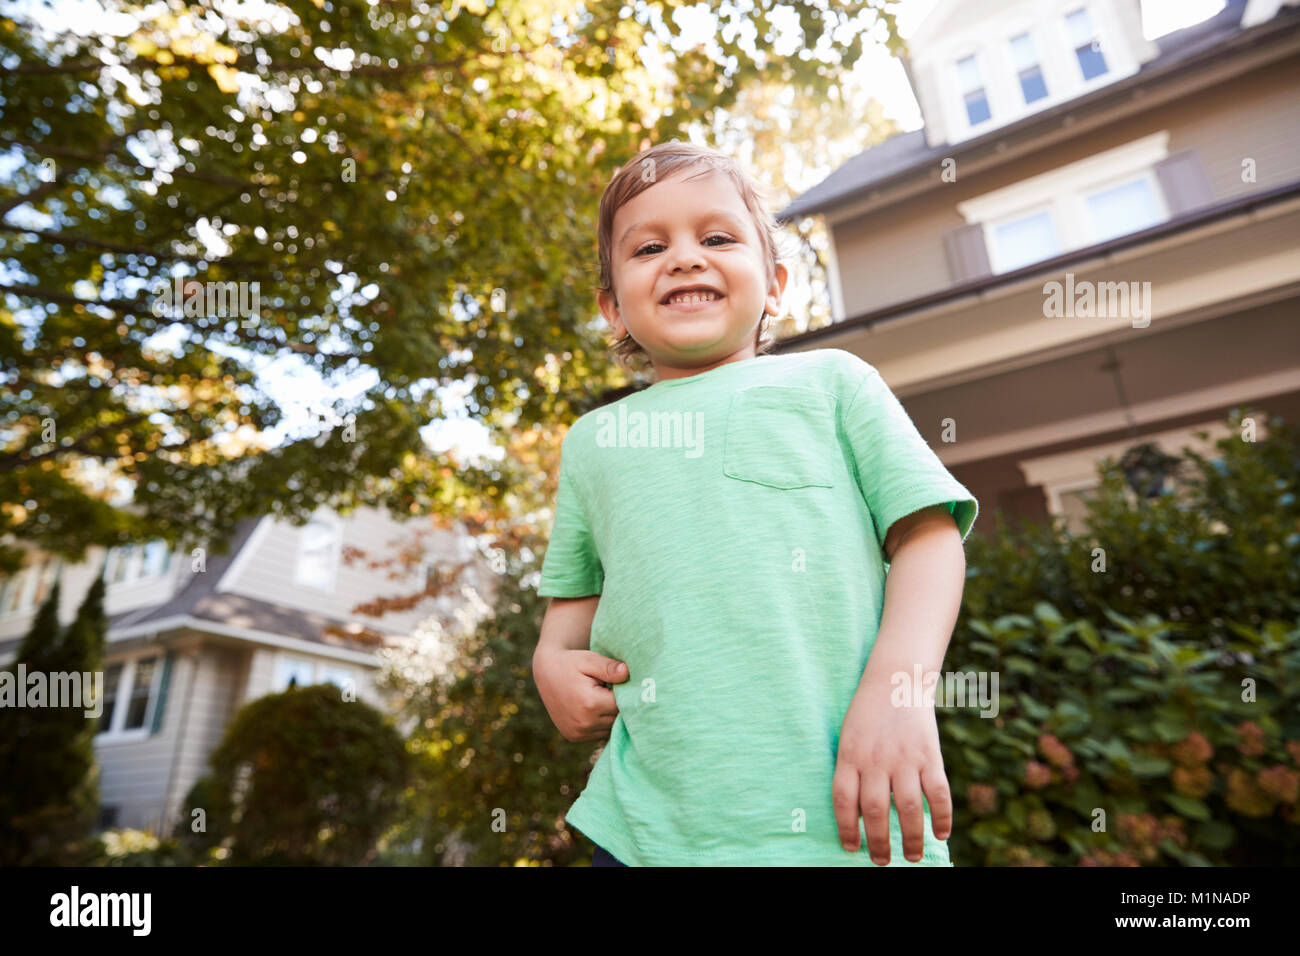 Portrait Of Young Boy Playing In Garden At Home Stock Photo